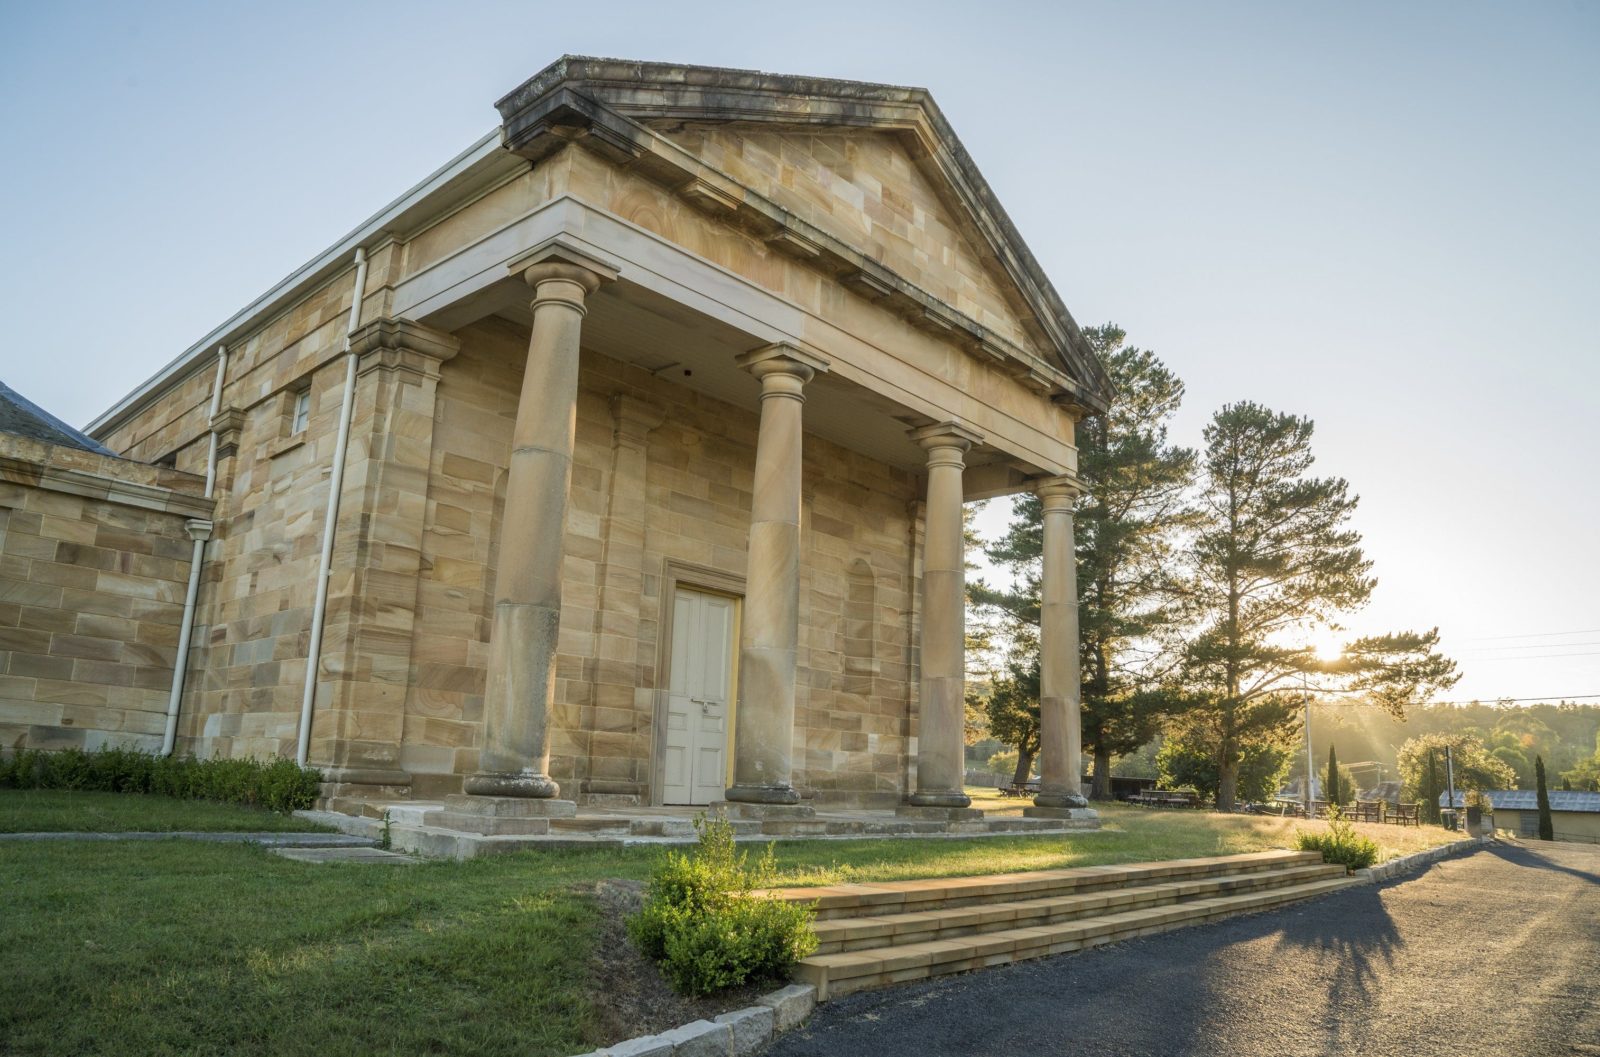 The Berrima Courthouse built in 1838 is now a museum attraction open to visitors.